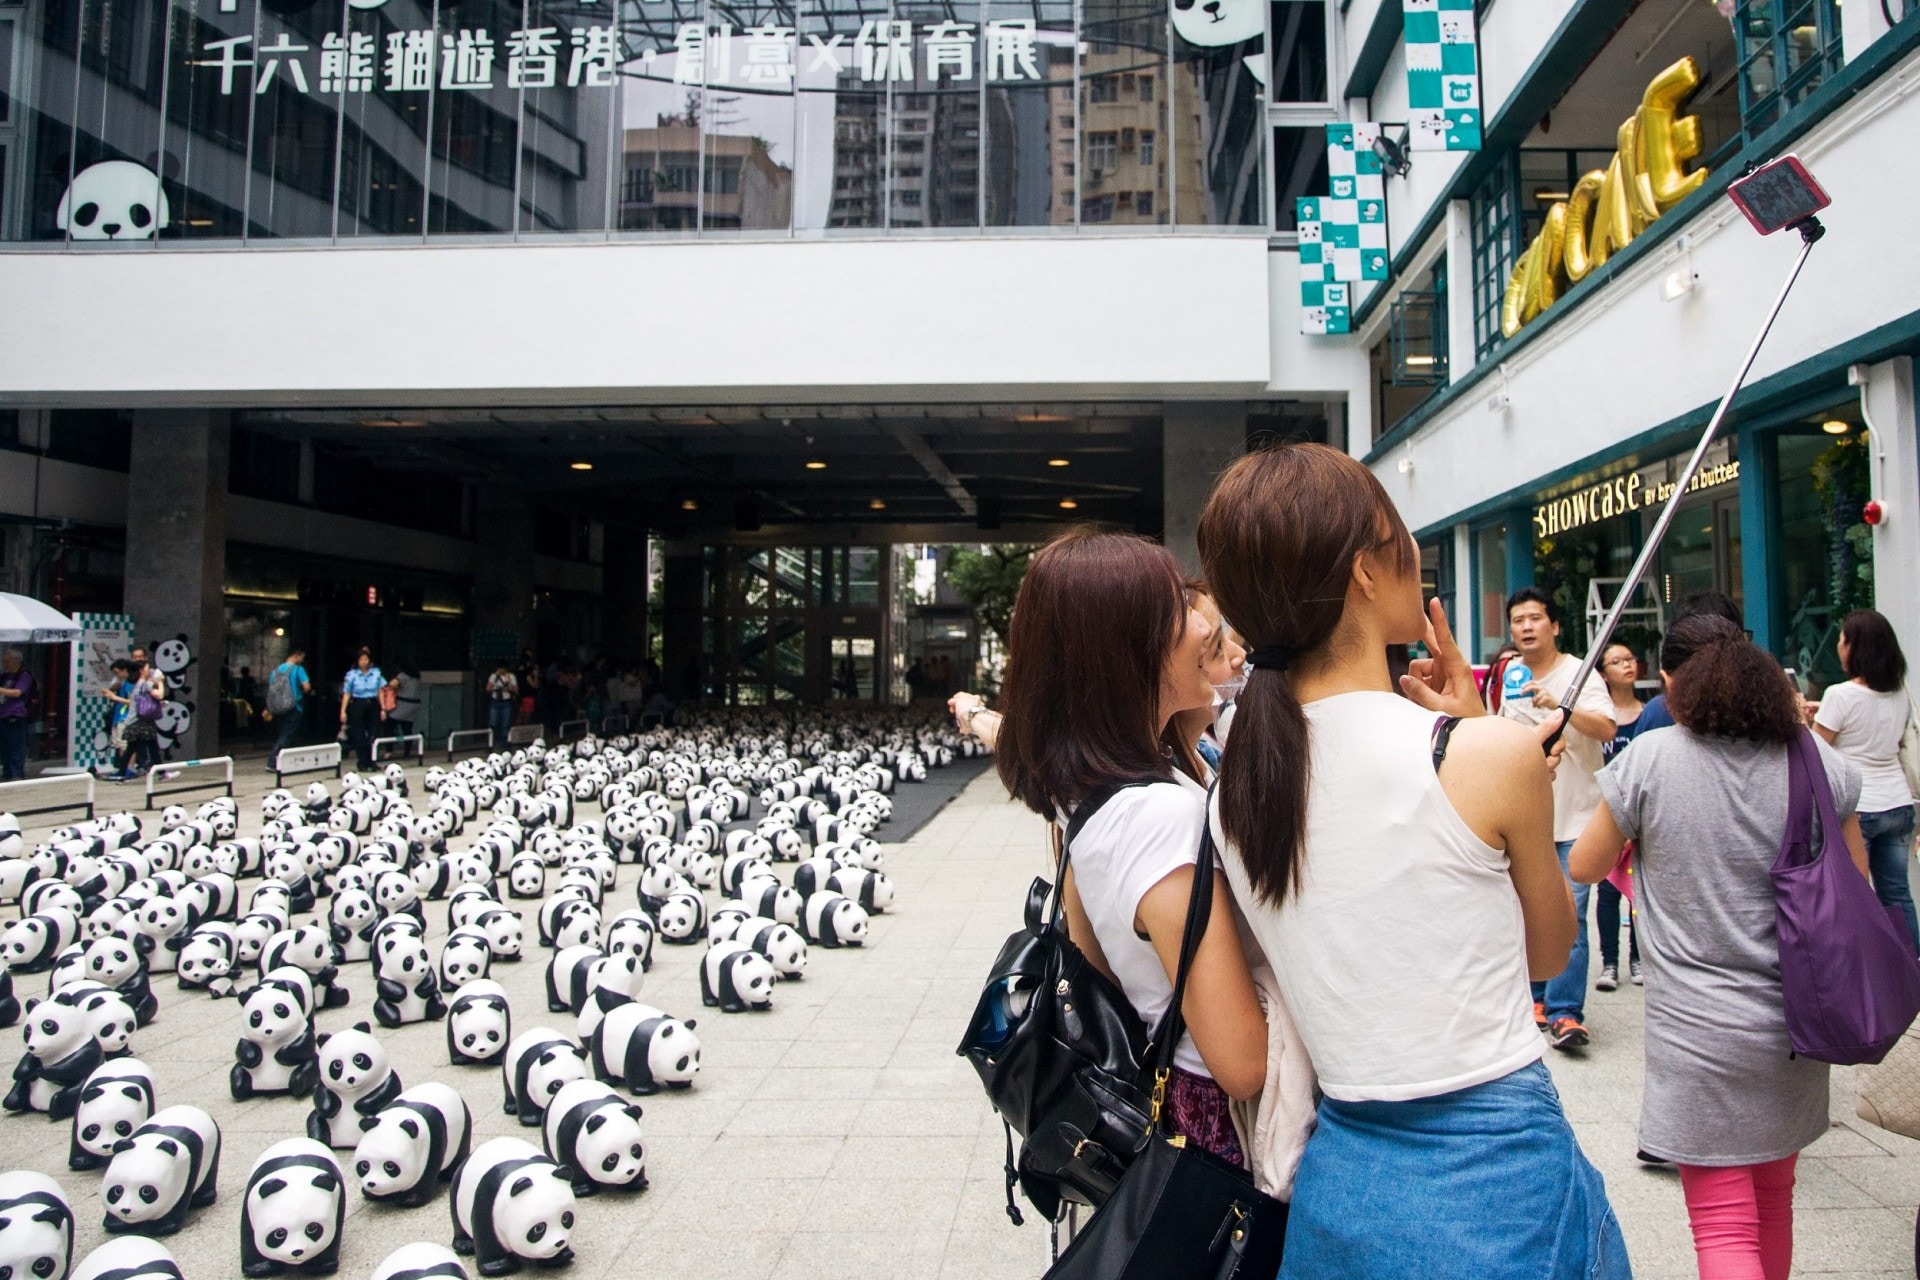 1600-Thousand Pandas Exhibition in 2019 - When you observe them, what thoughts cross your mind about PMQ's future?